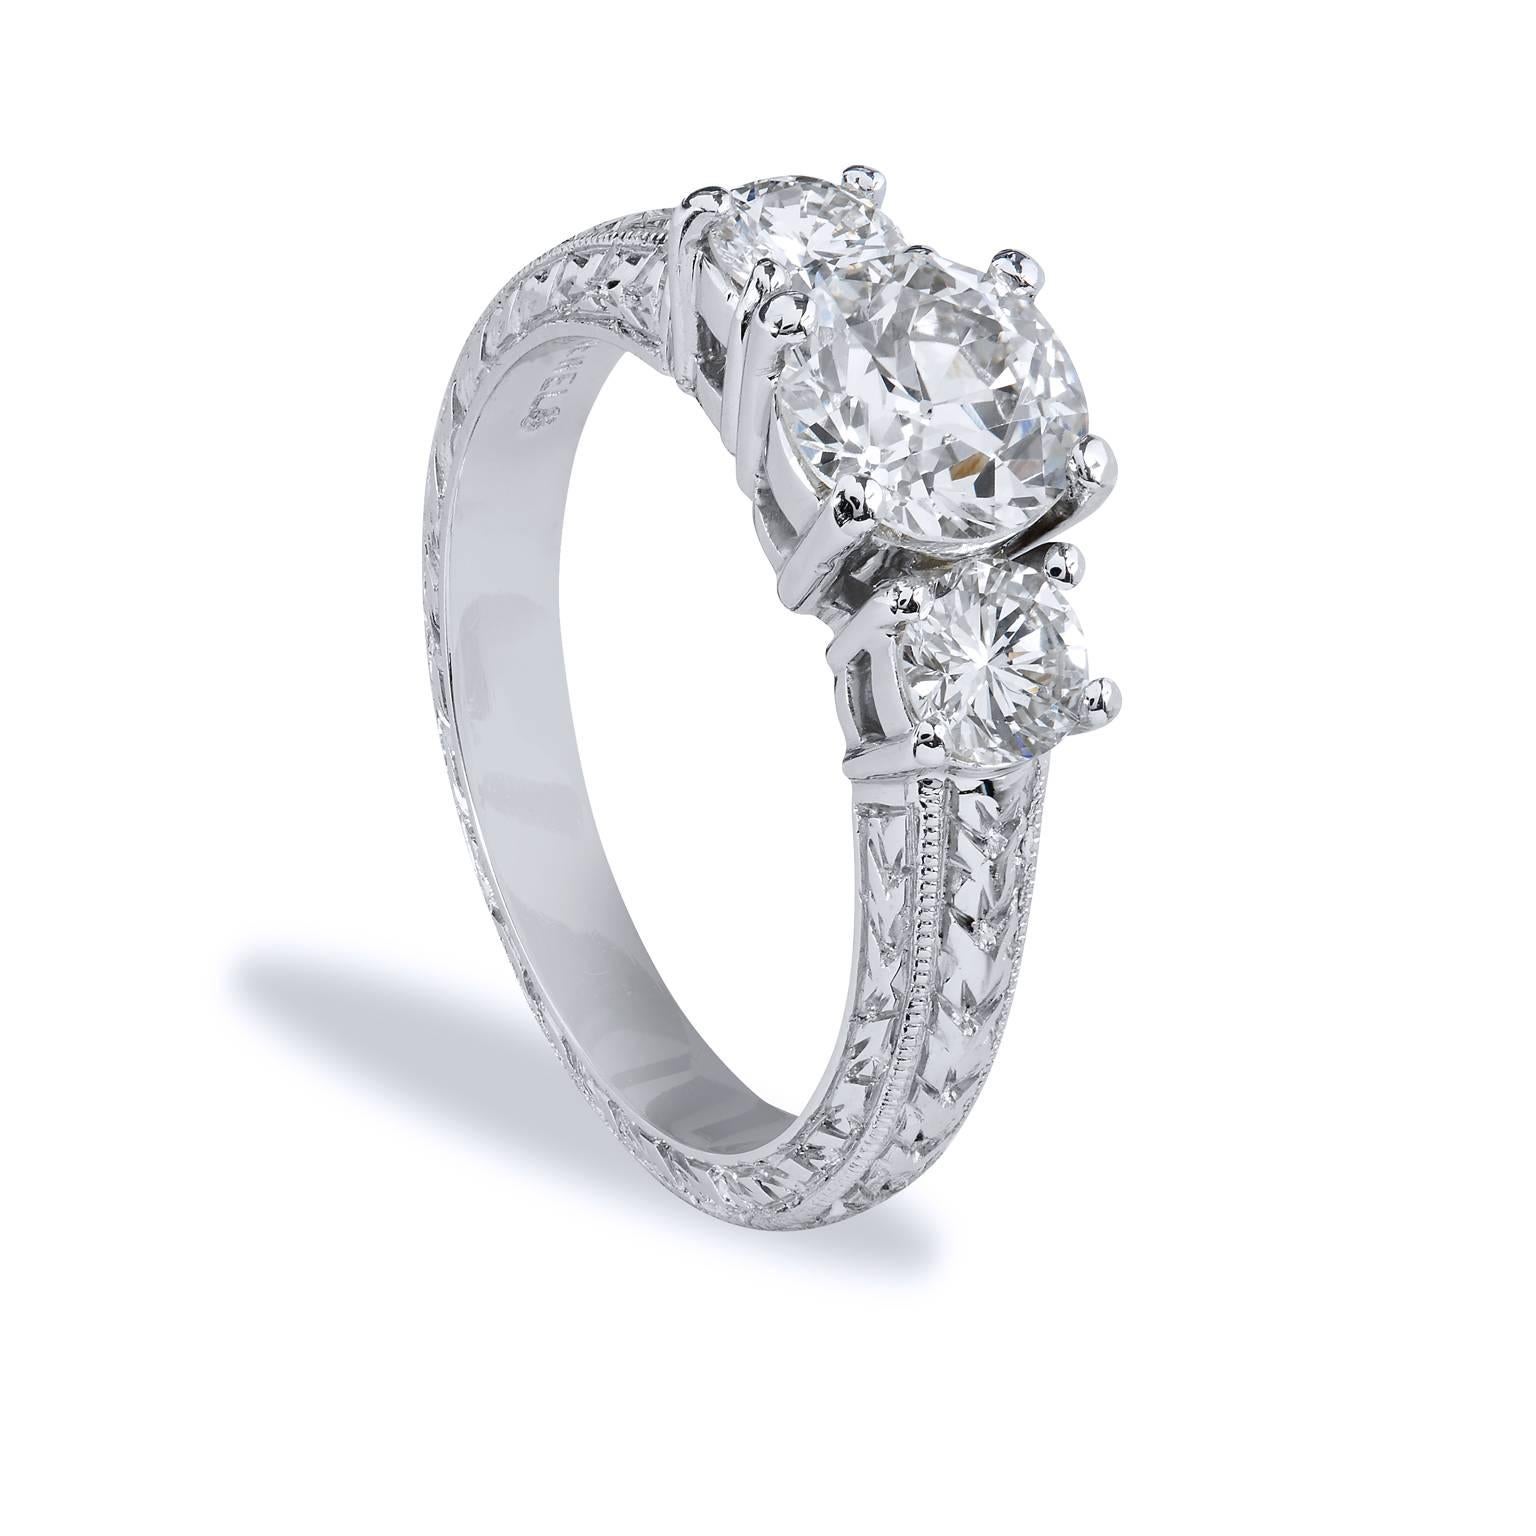 3 ct engagement rings